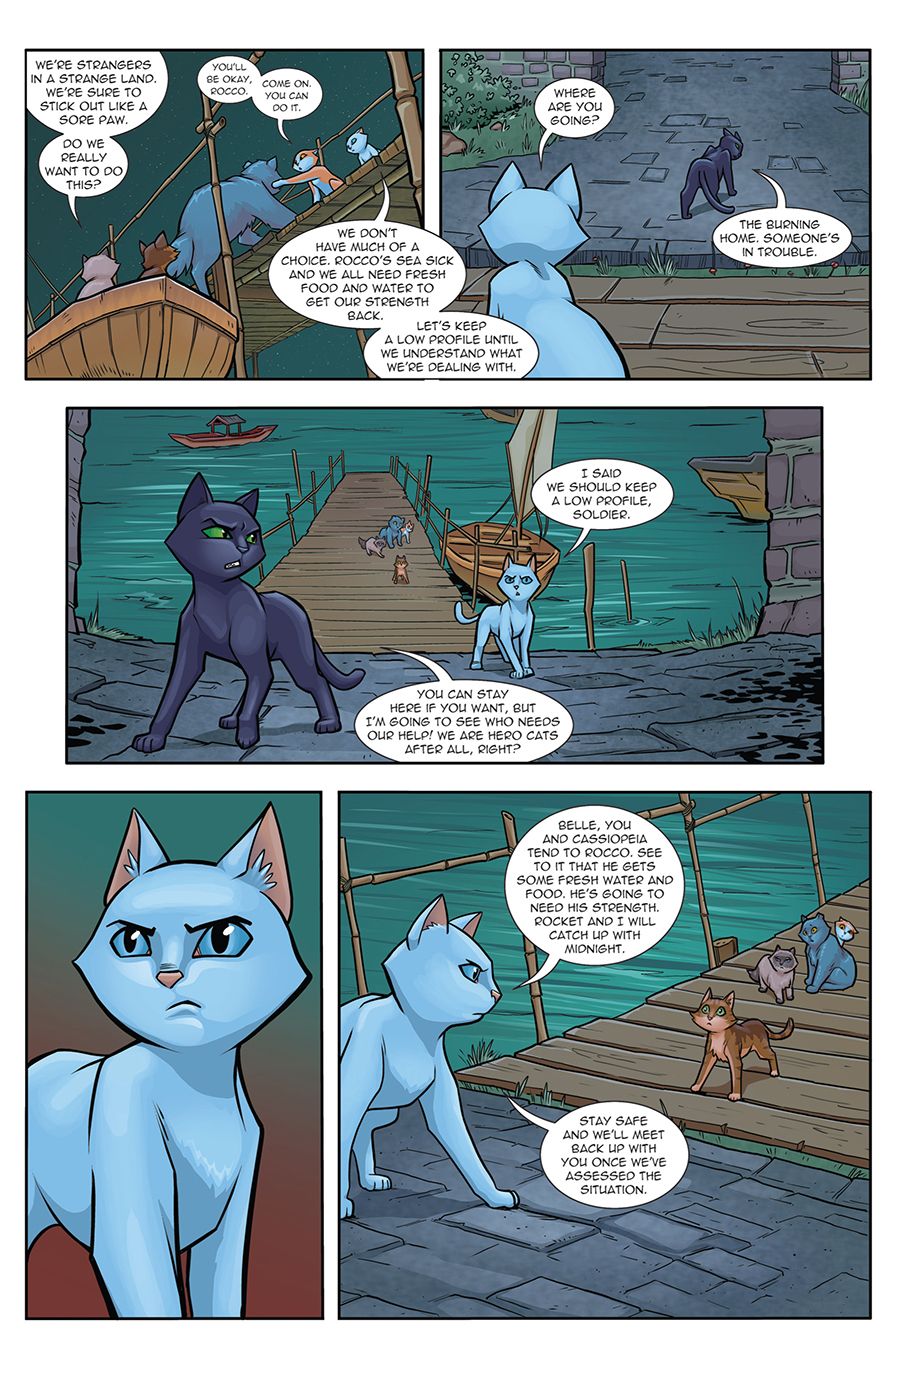 Hero_Cats_12-PREVIEW-2